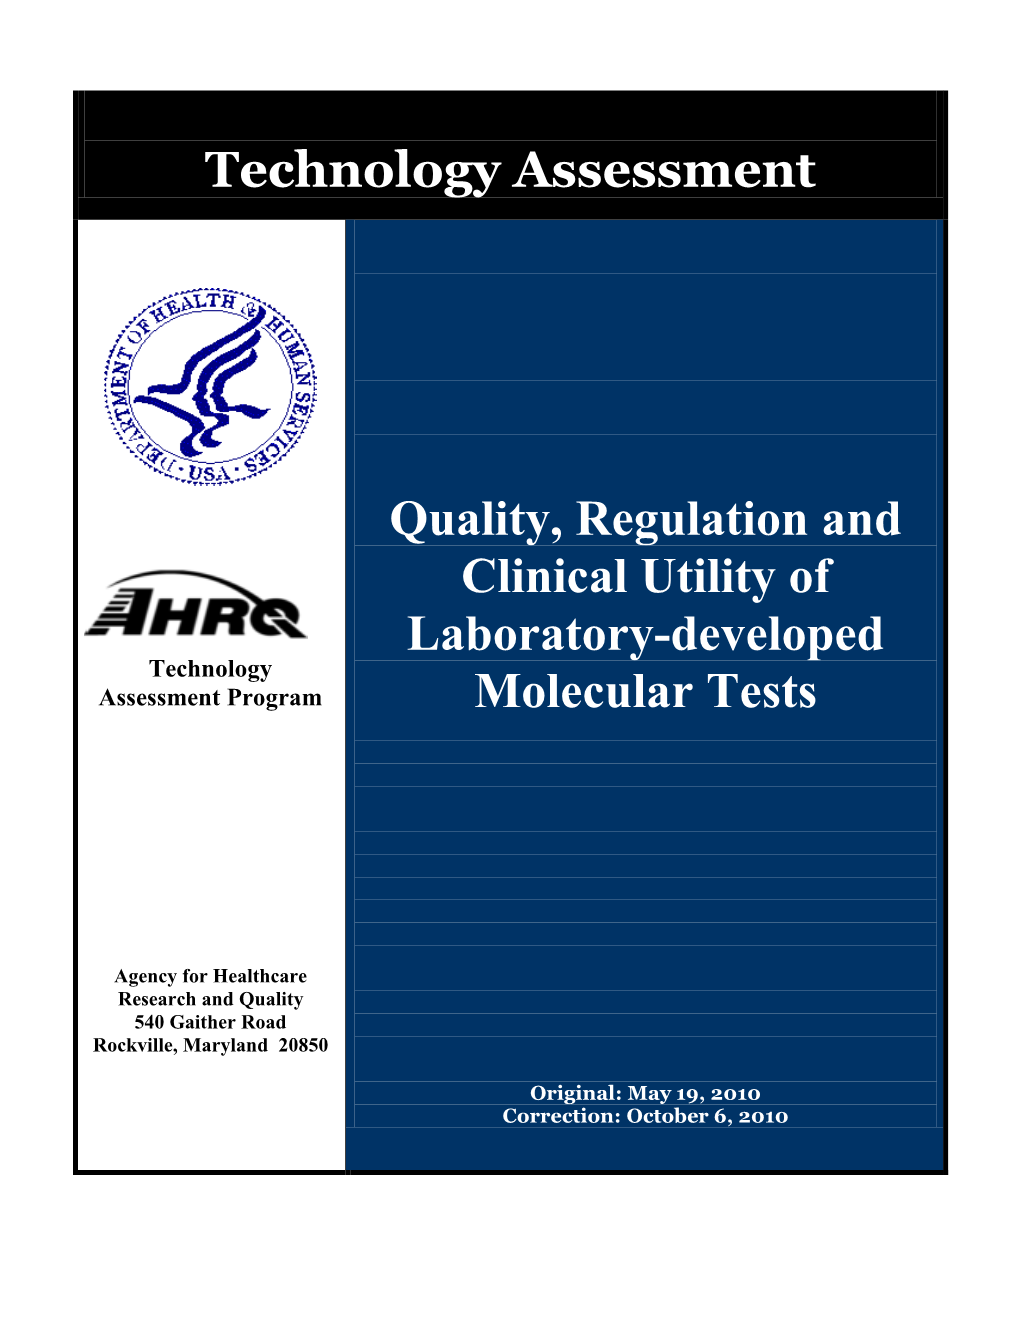 Quality, Regulation and Clinical Utility of Laboratory-Developed Molecular Tests